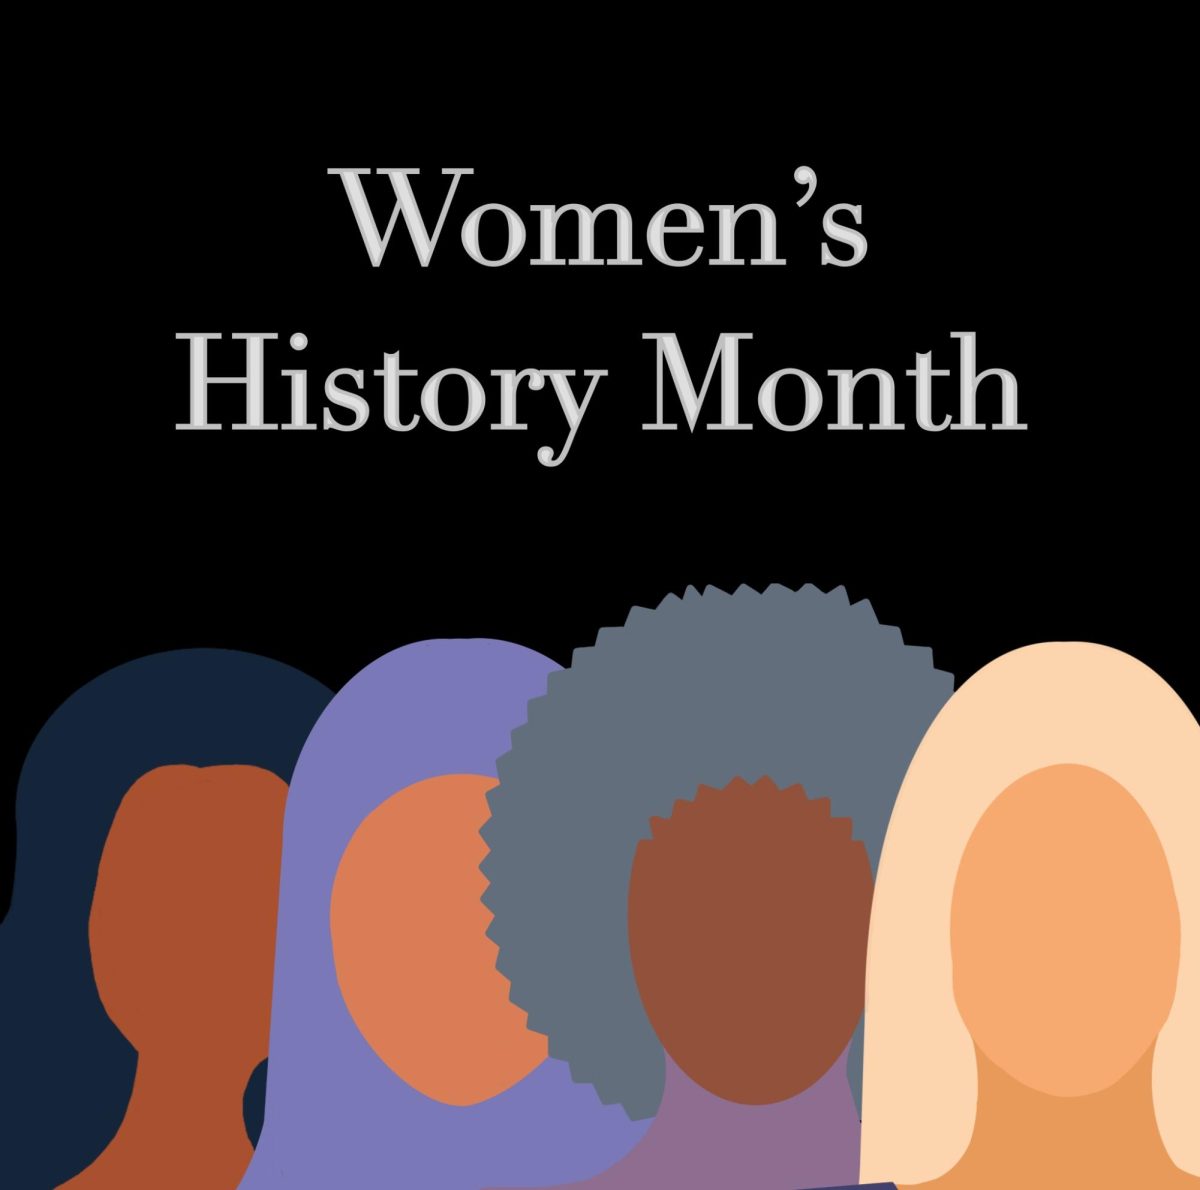 March has been Womens History Month since 1987 when the Sonoma School District began Womens History Week, which later turned into a whole month.